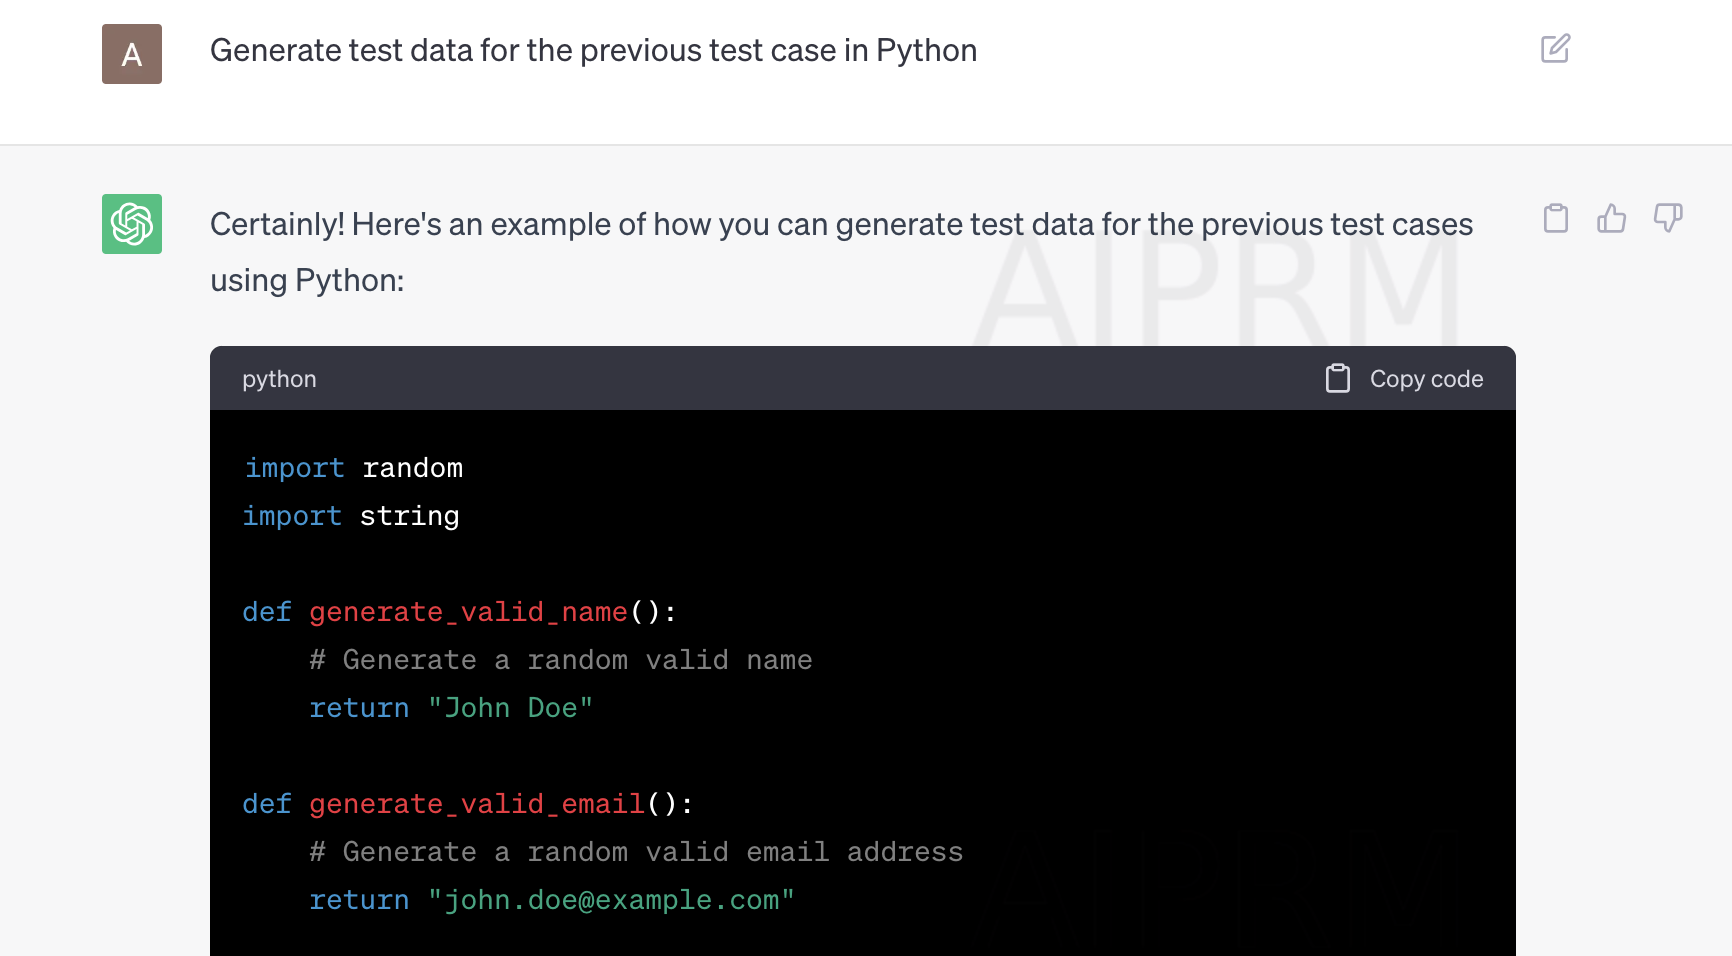 Let us see how we can use ChatGPT to generate test data for the same example, developing a social media application. We’re asking ChatGPT to generate test data for the test case previously mentioned in a language of our choice, for example, Python. 